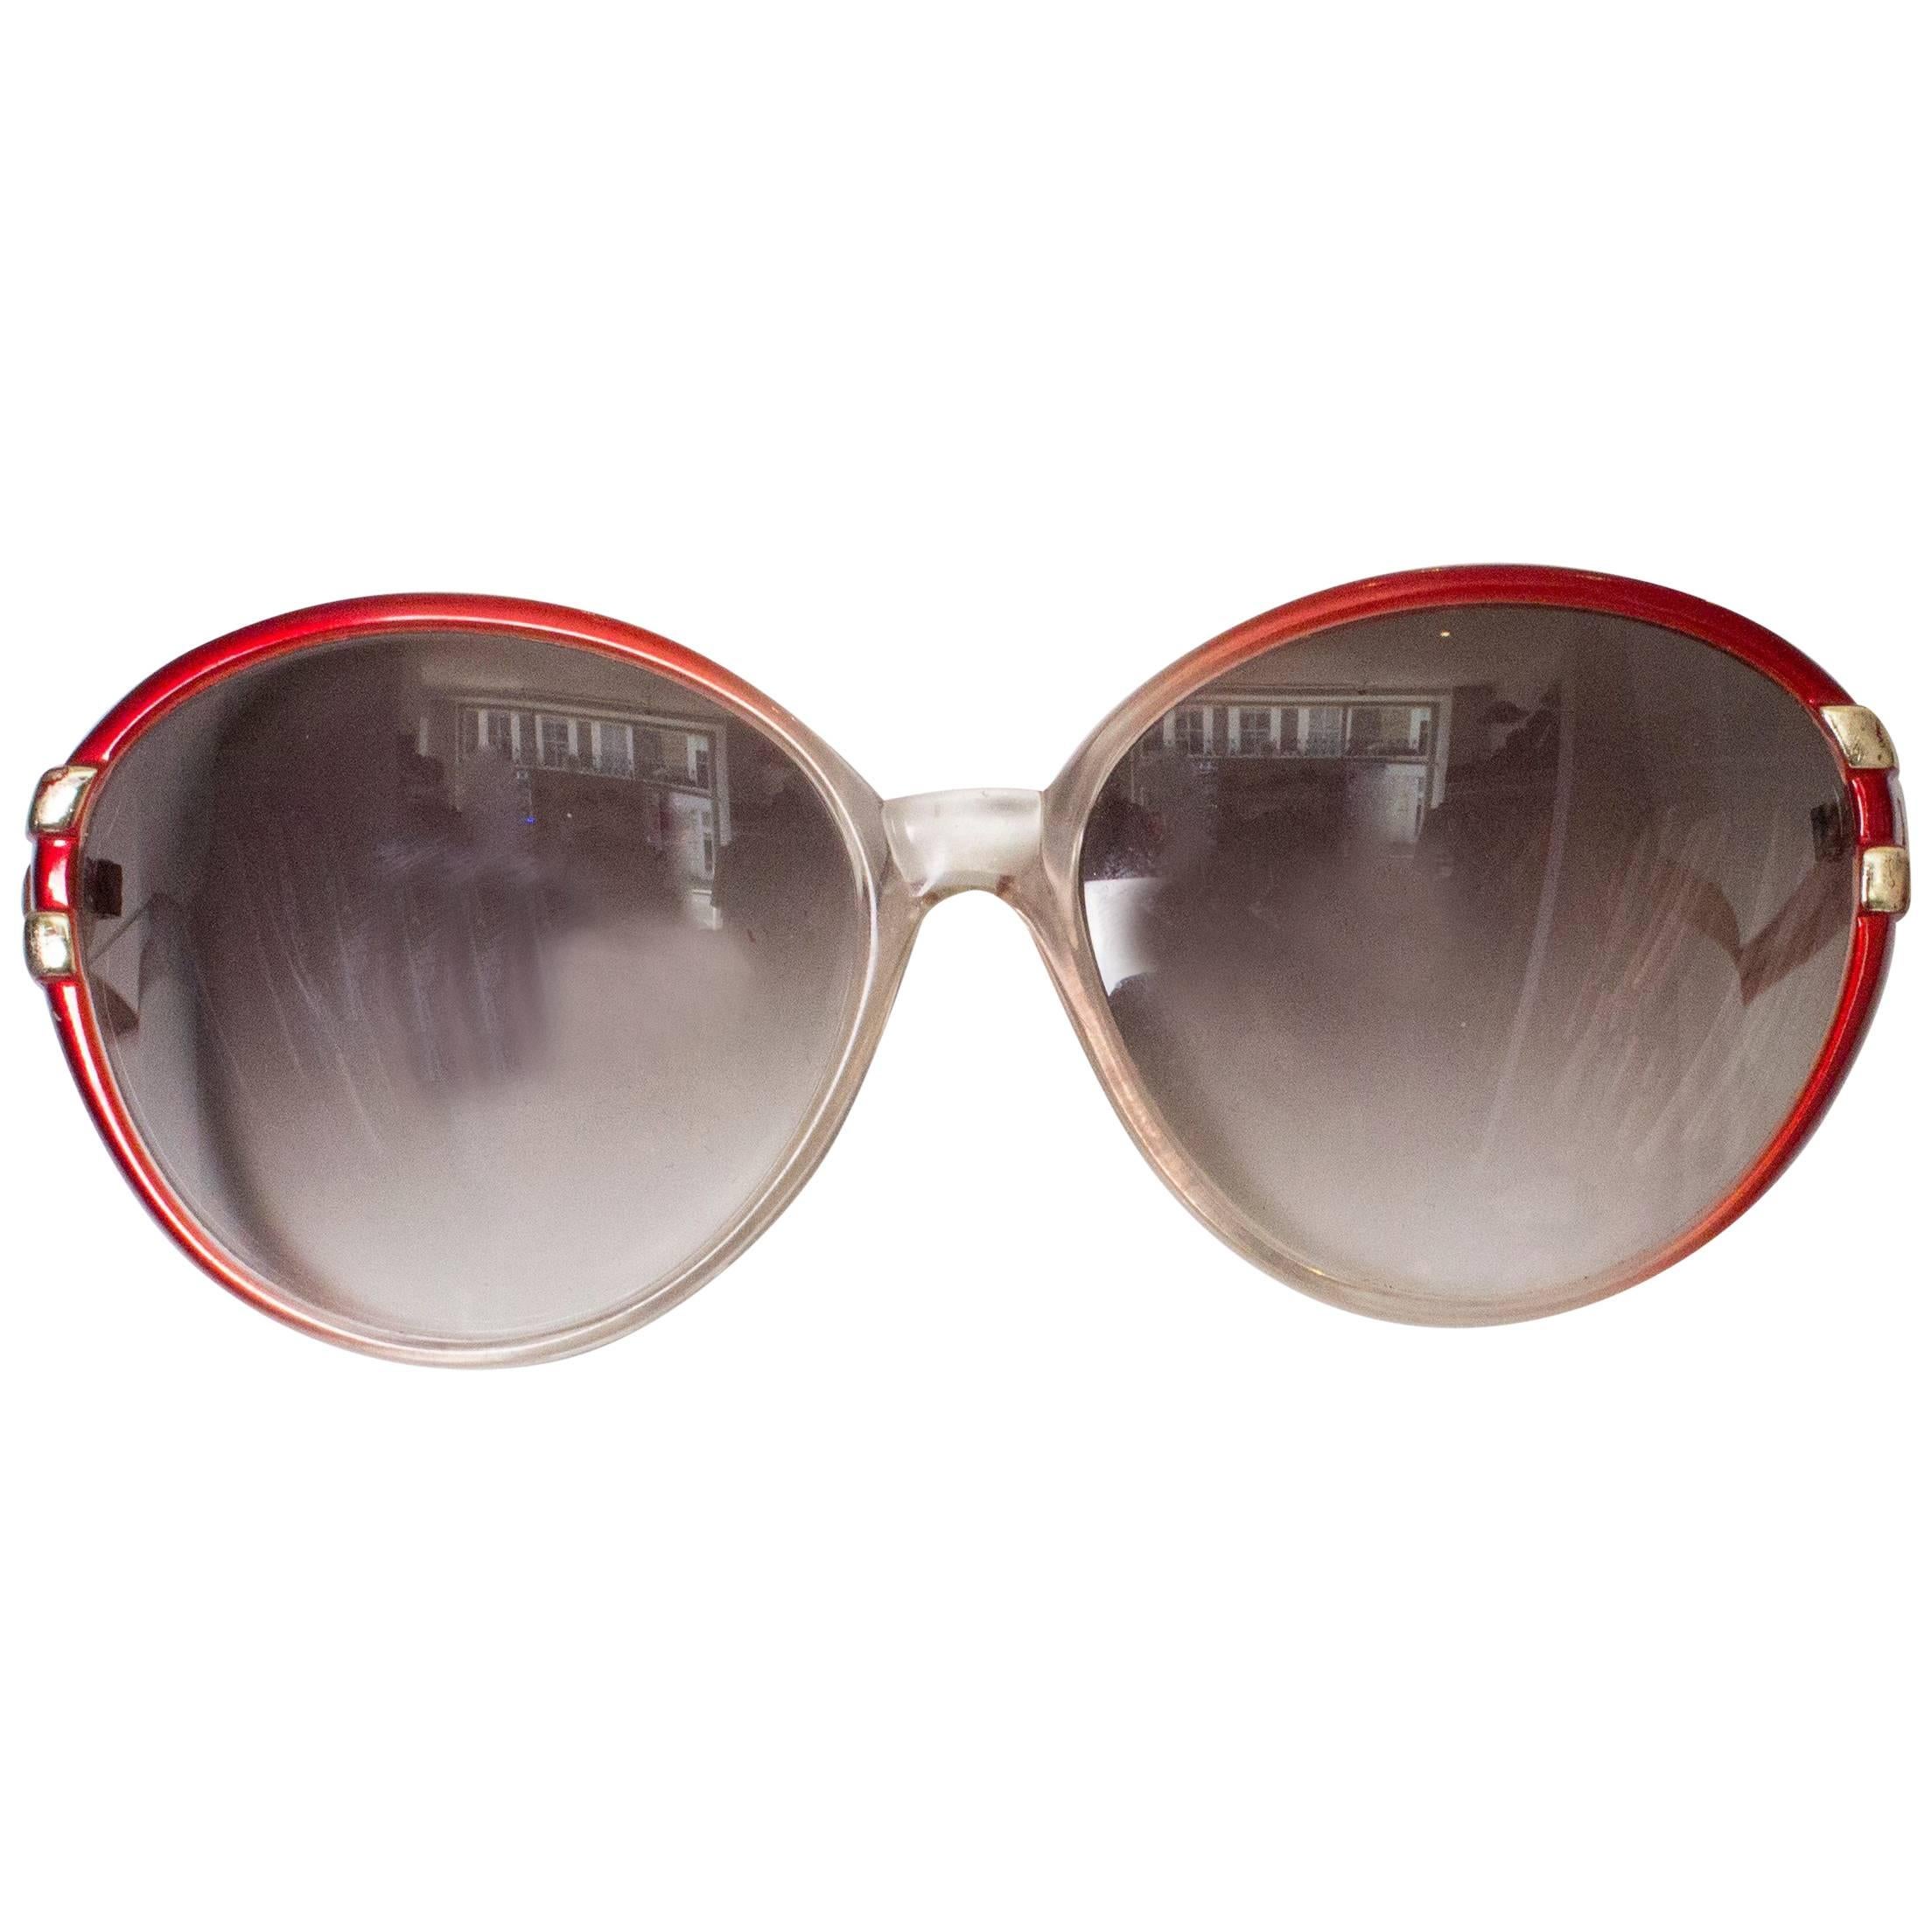 A pair of Vintage 1970s Sunglasses by Paola Belle